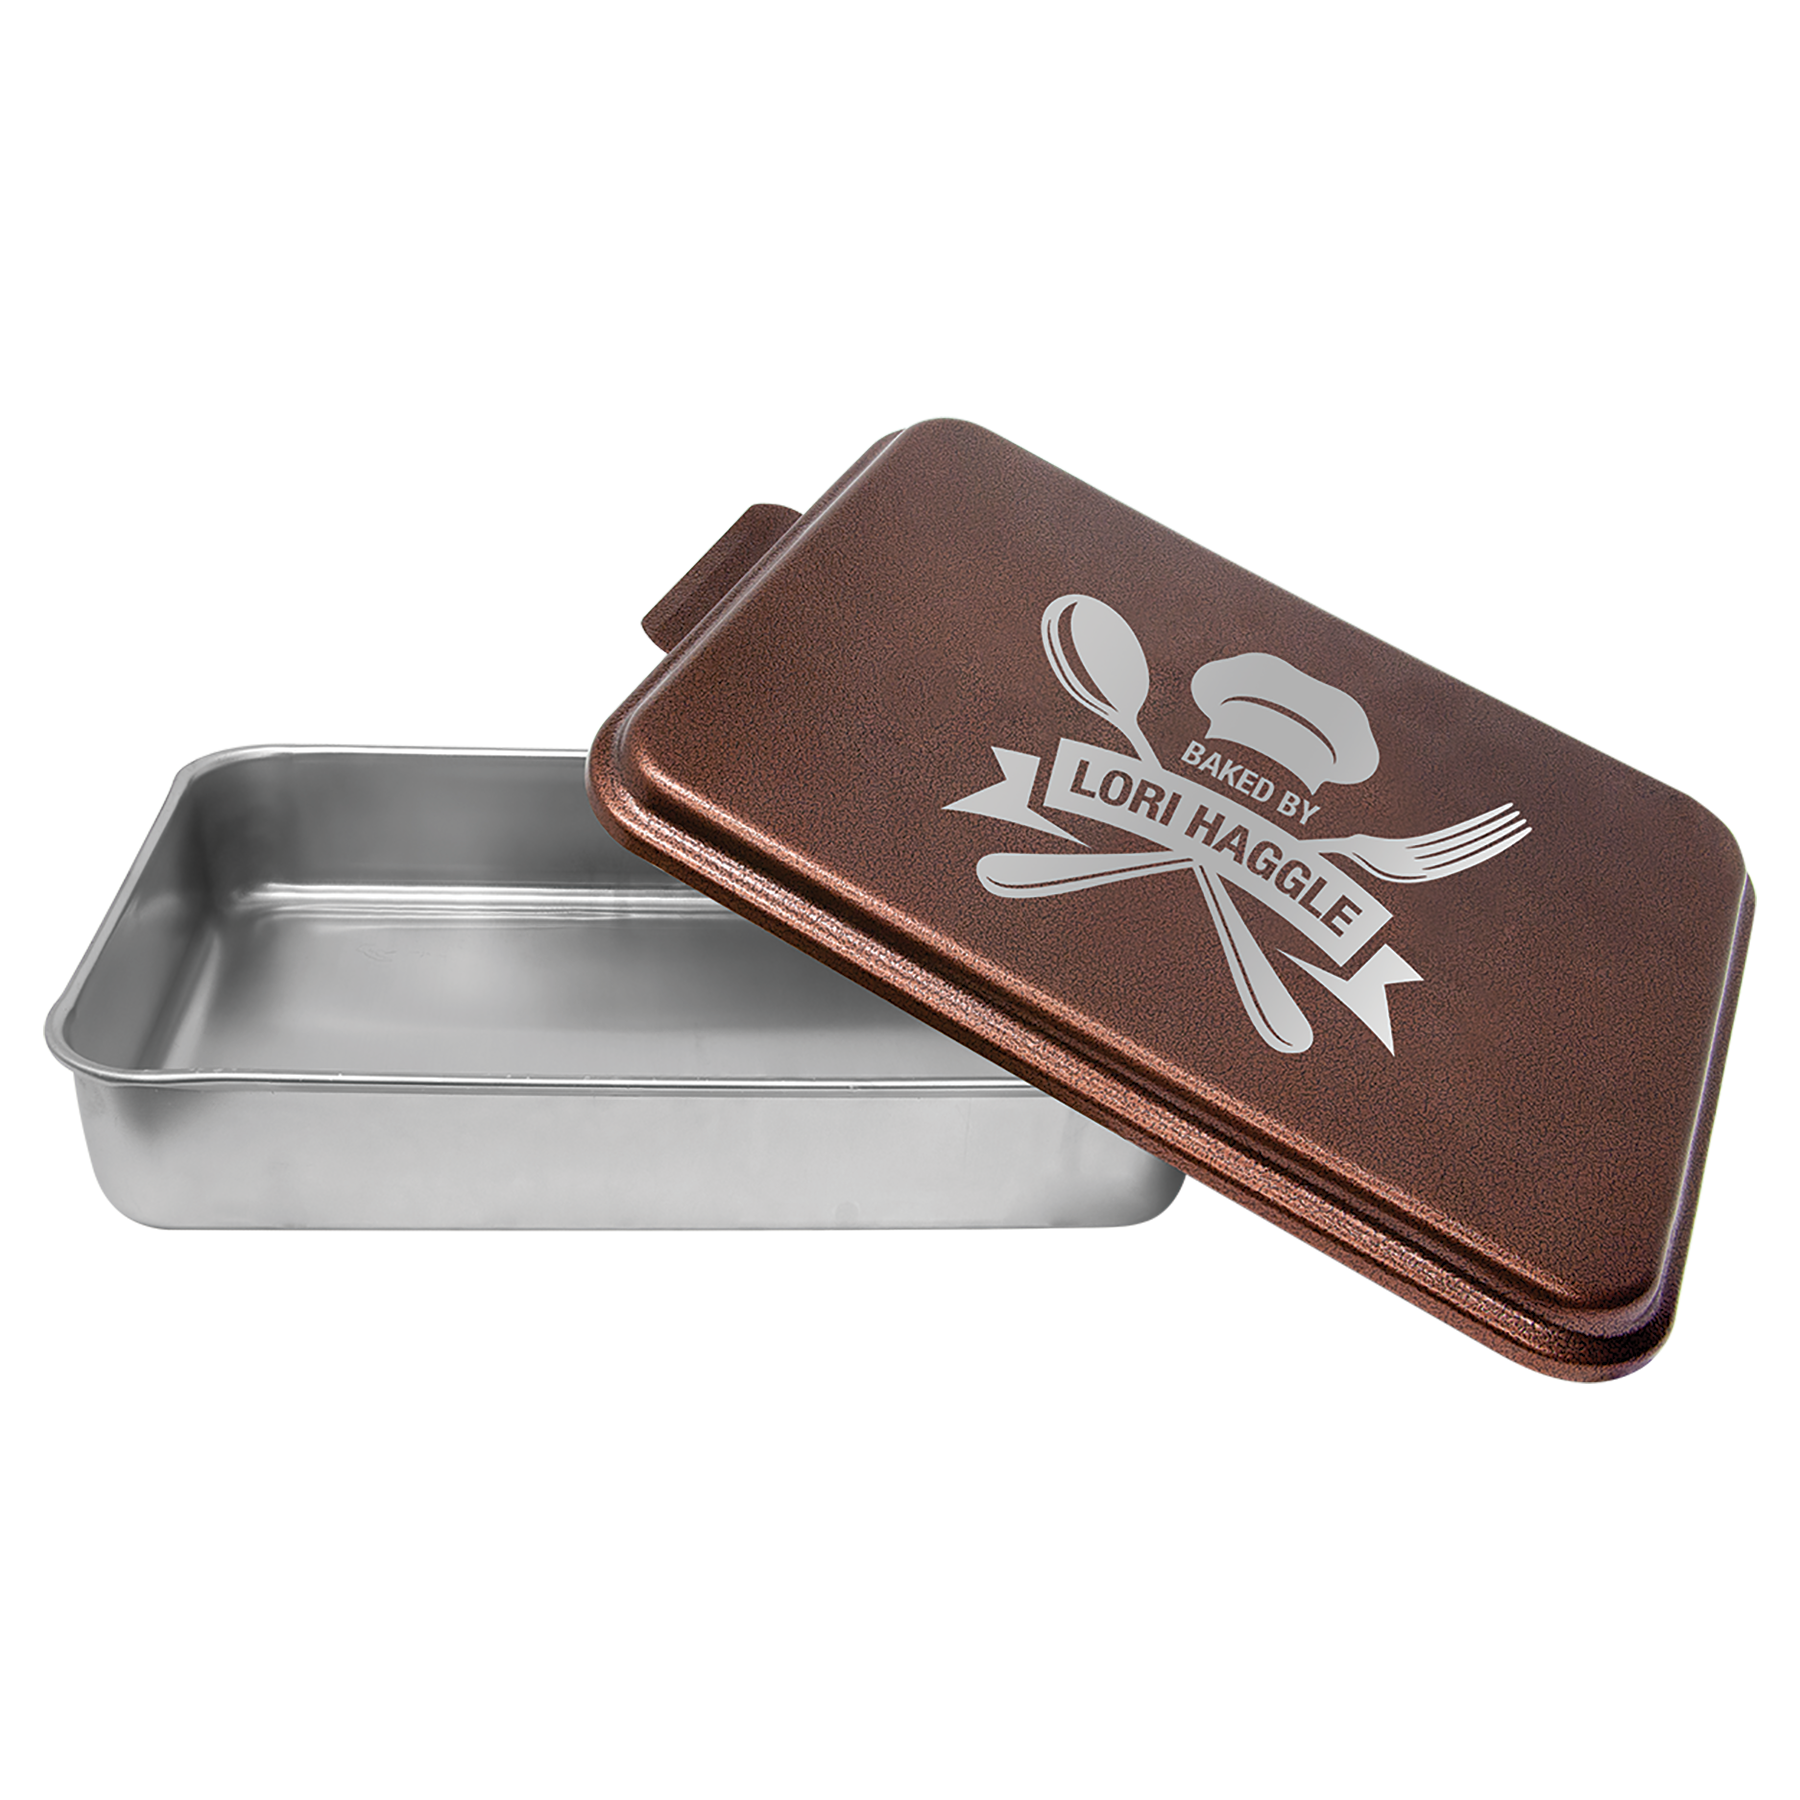 Sheet Cake Pans Made in the USA